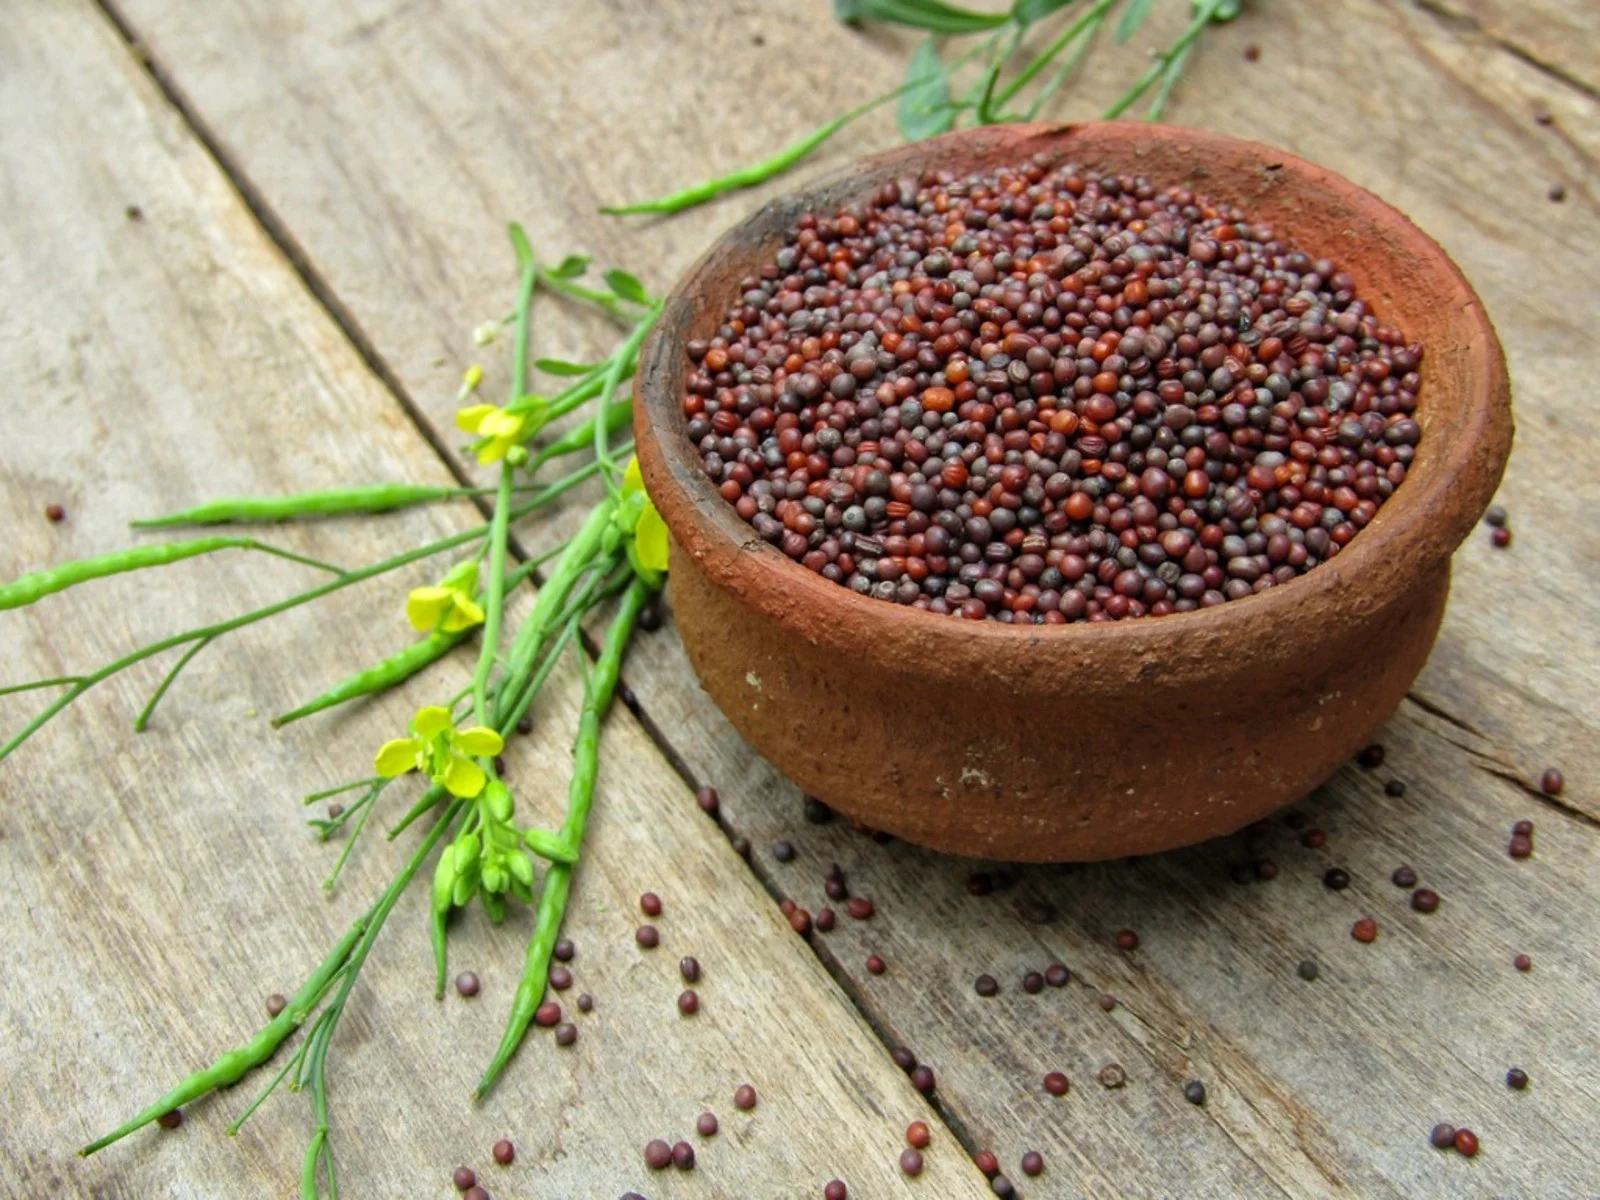 How To Use Mustard Seeds